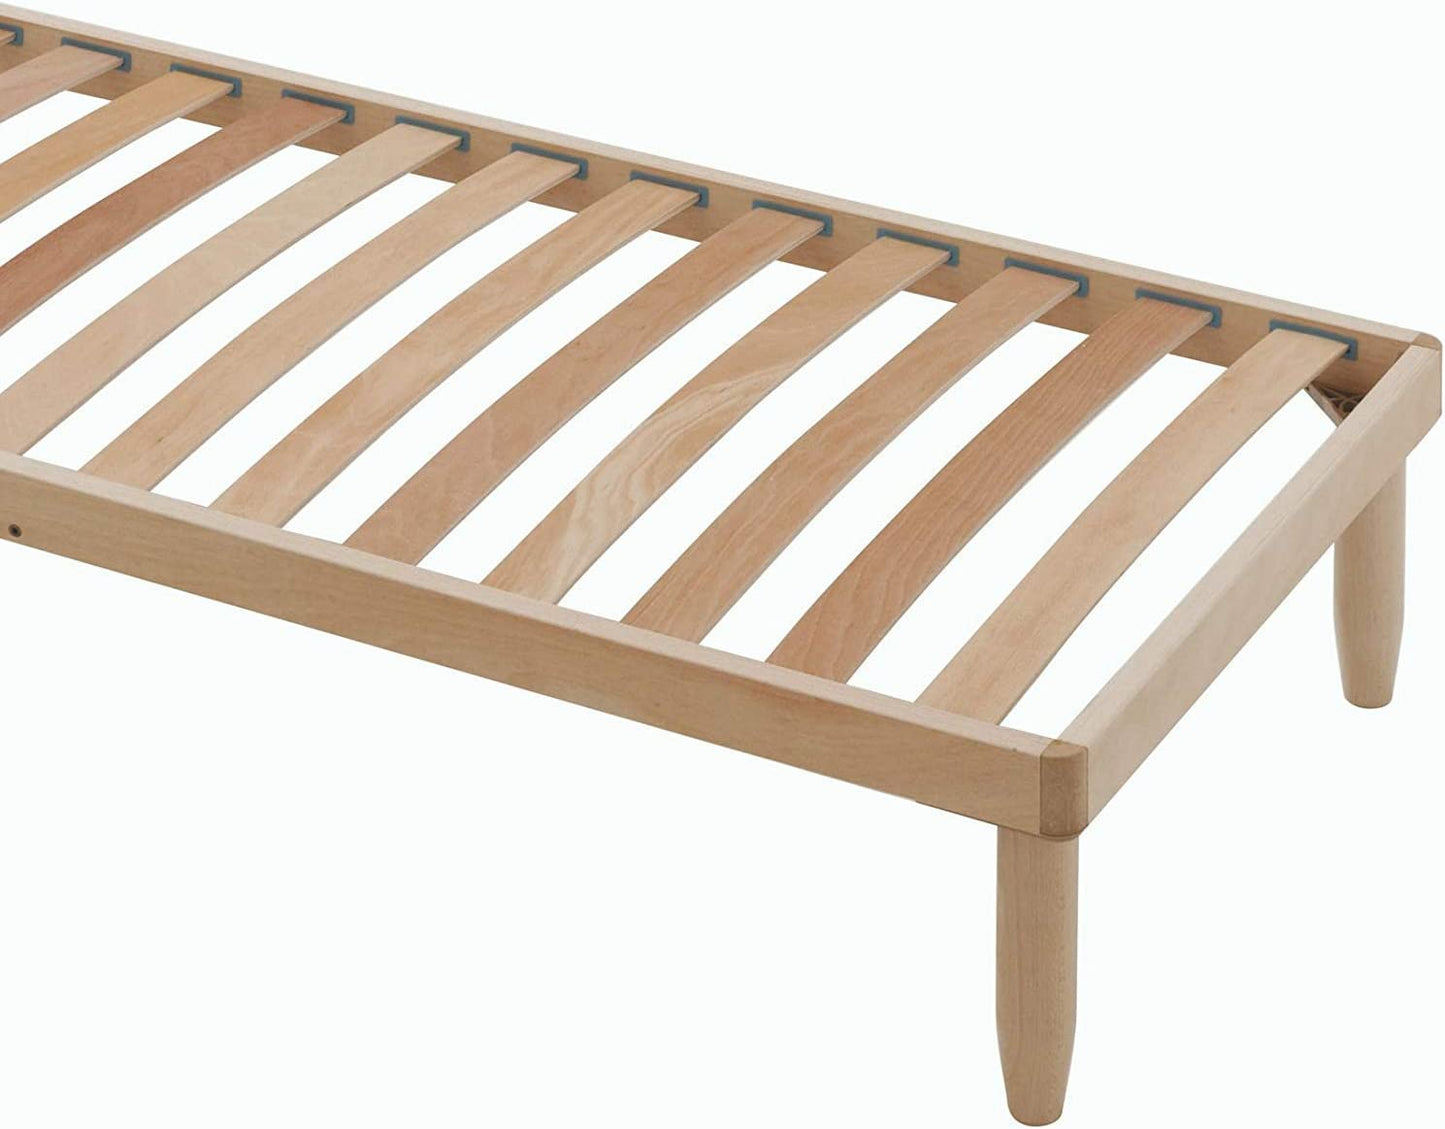 Single Wood Bed Frame 3' X 6'3" Size 90X190 Cm with Strong Beech Wooden Slats, the Best Orthopedic Bed Base FULLY ASSEMBLED + 4 Legs Beds Mattresses & Pillows 100% ITALIAN